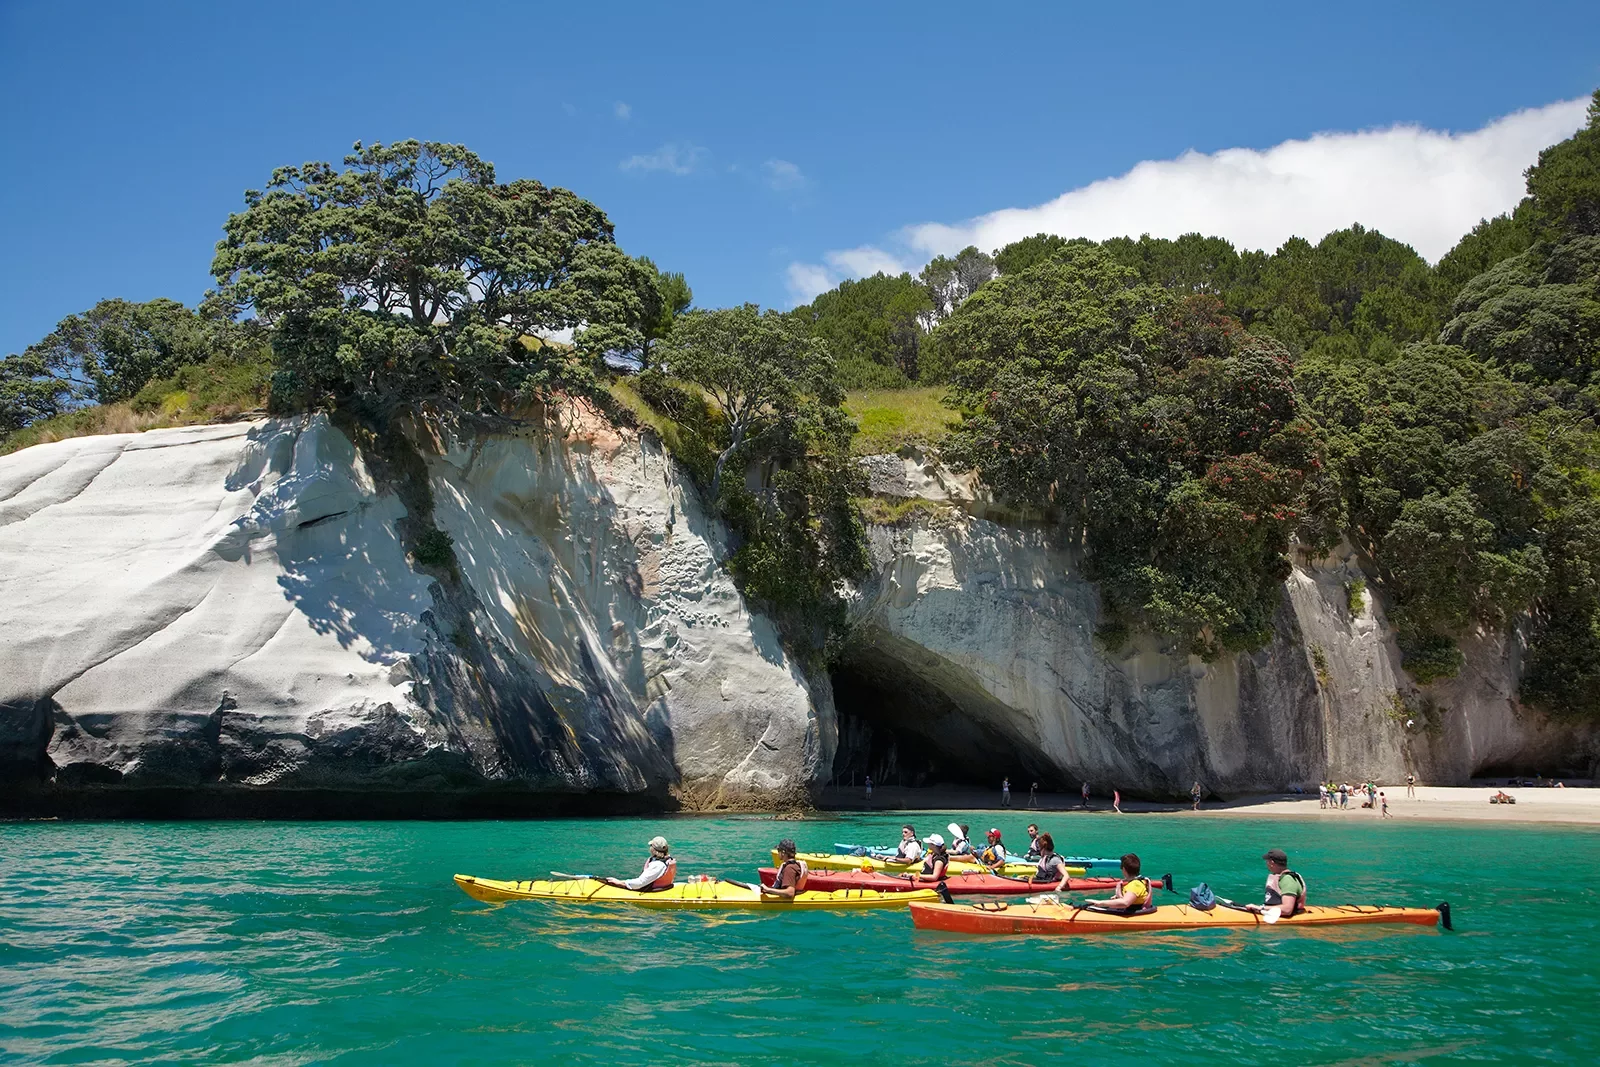 Guests kayaking away from beach, white stone cliff behind them.